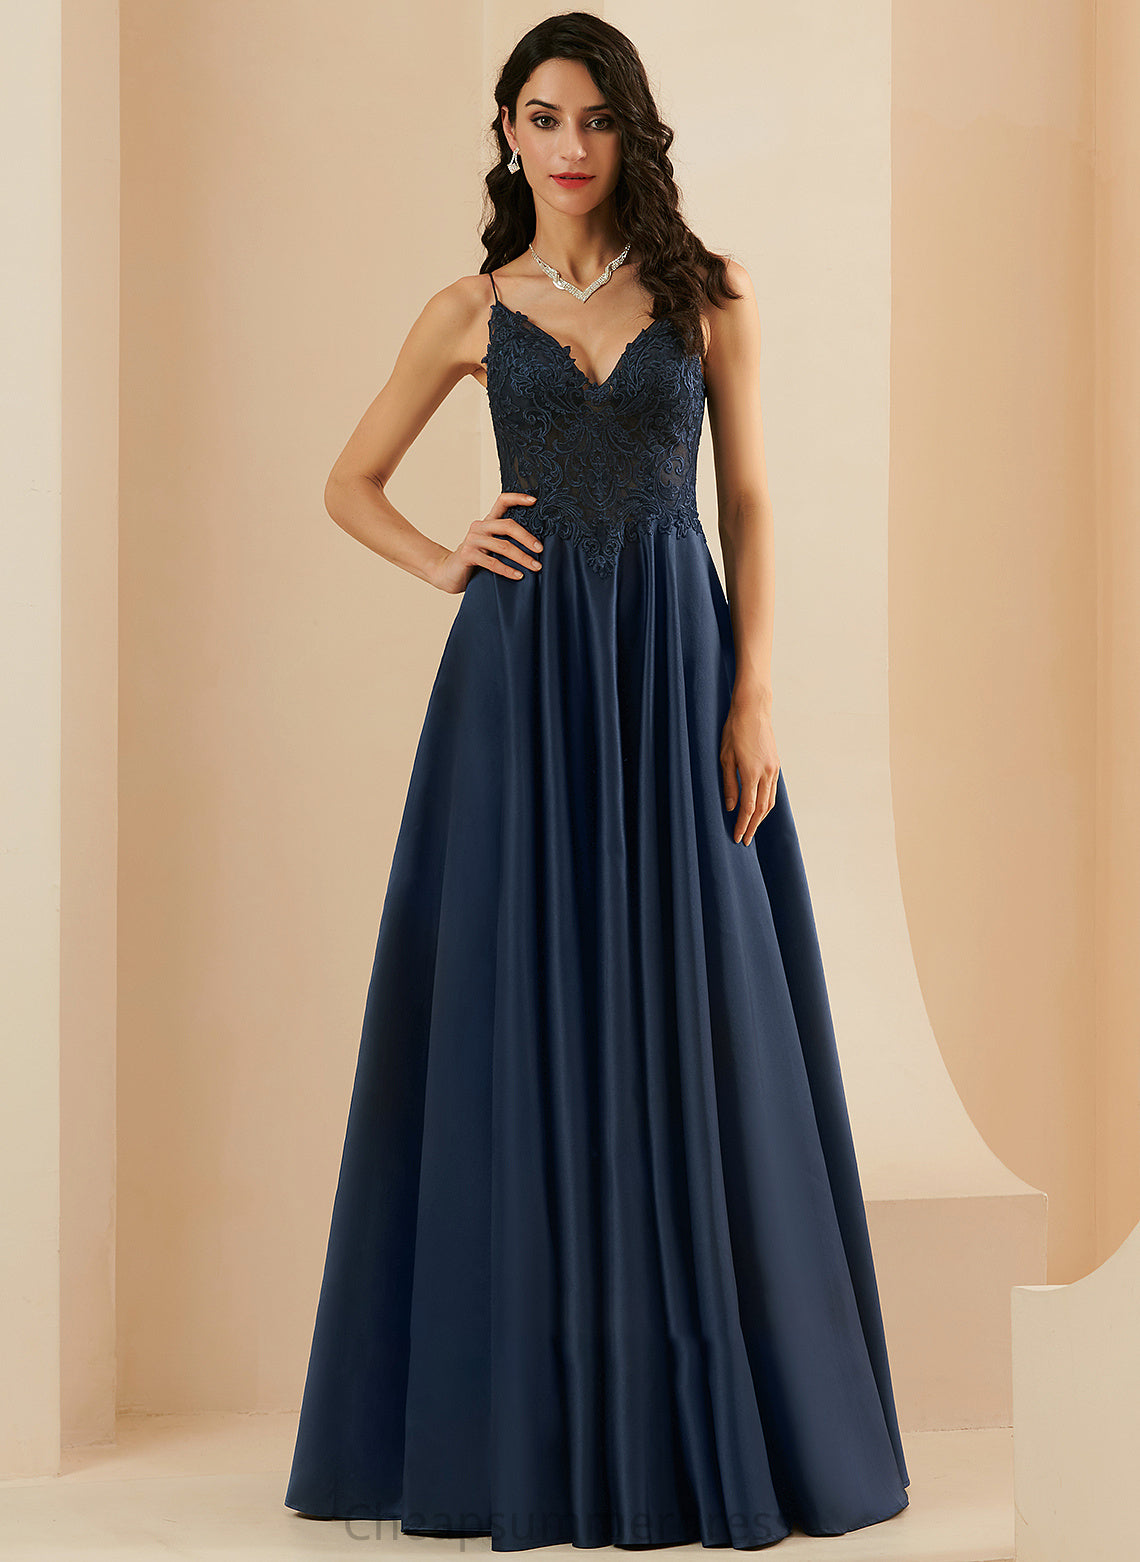 With V-neck Lace A-Line Floor-Length Prom Dresses Satin Dayana